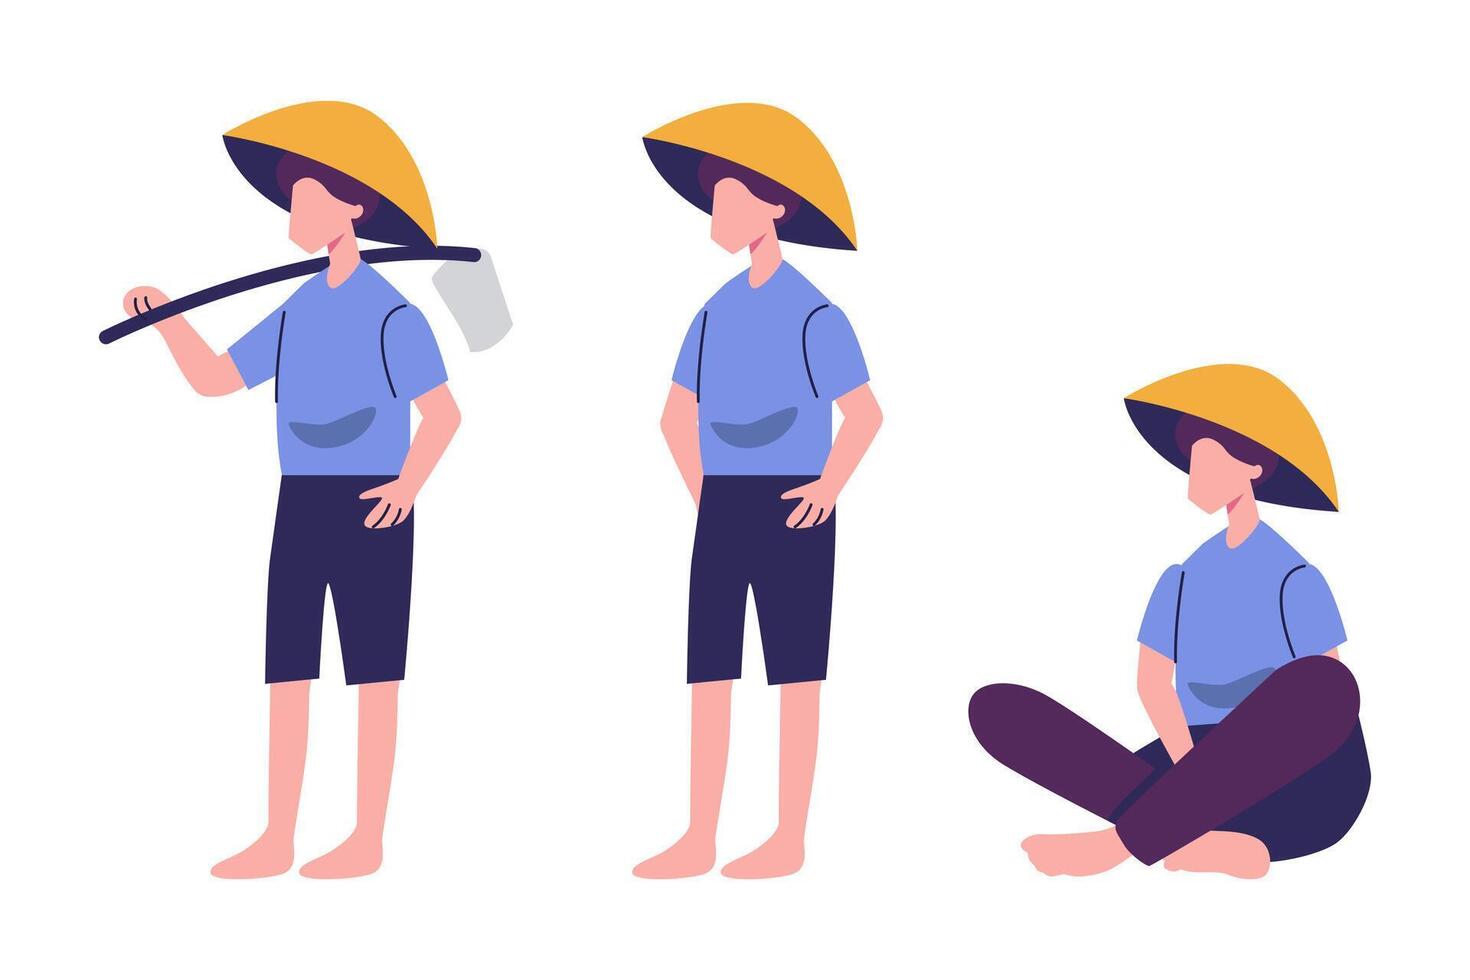 rice farmer characters in flat style illustration vector design